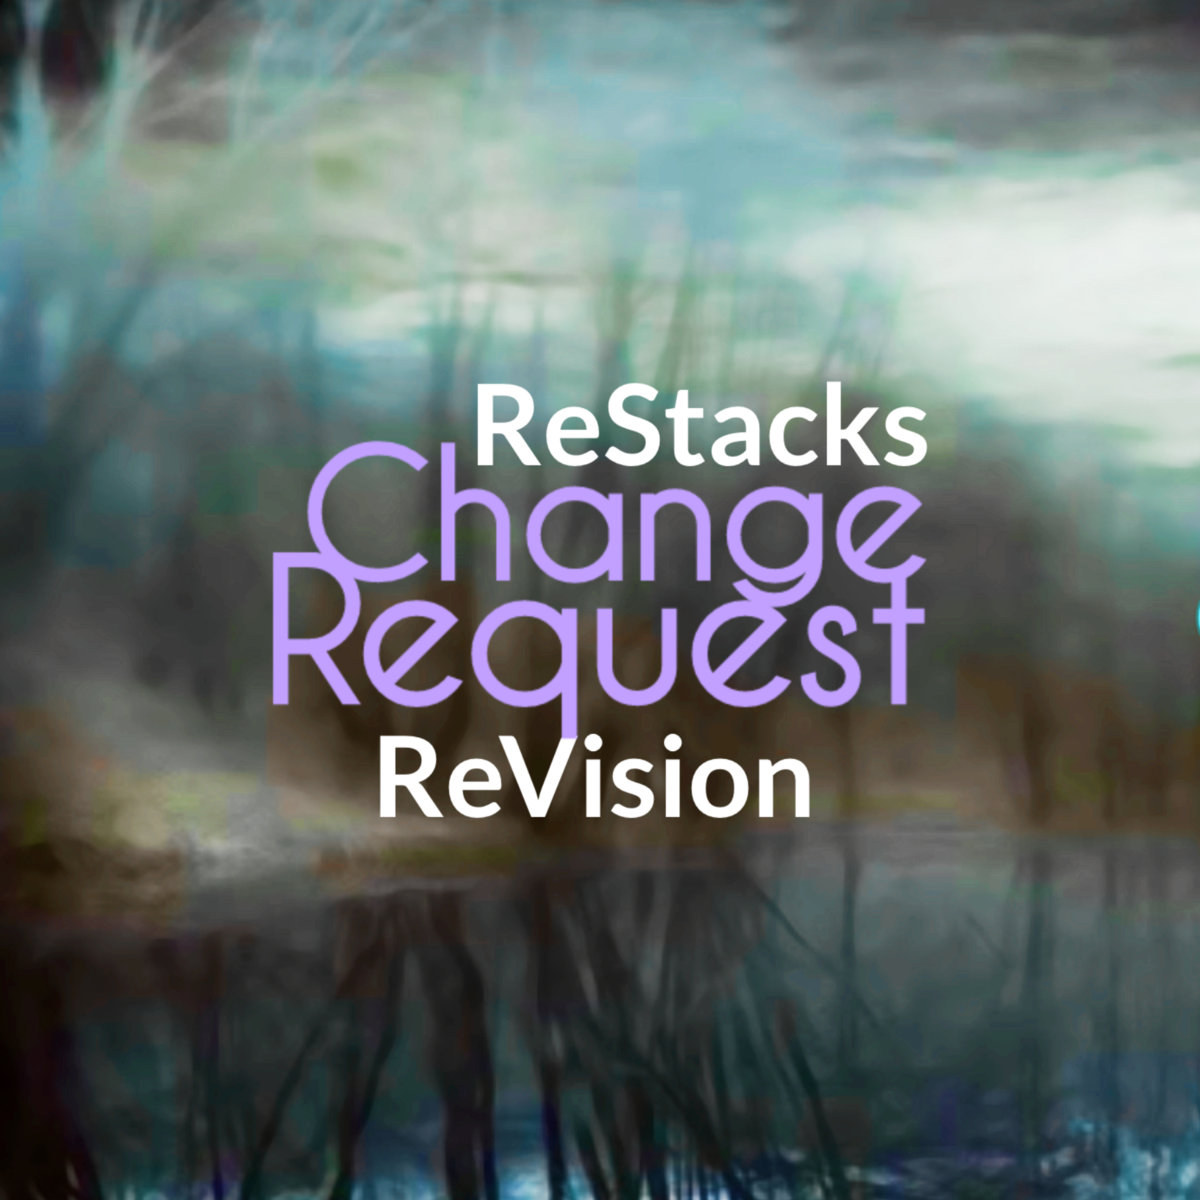 Re Stacks (Change Request ReVision) by Bon Iver